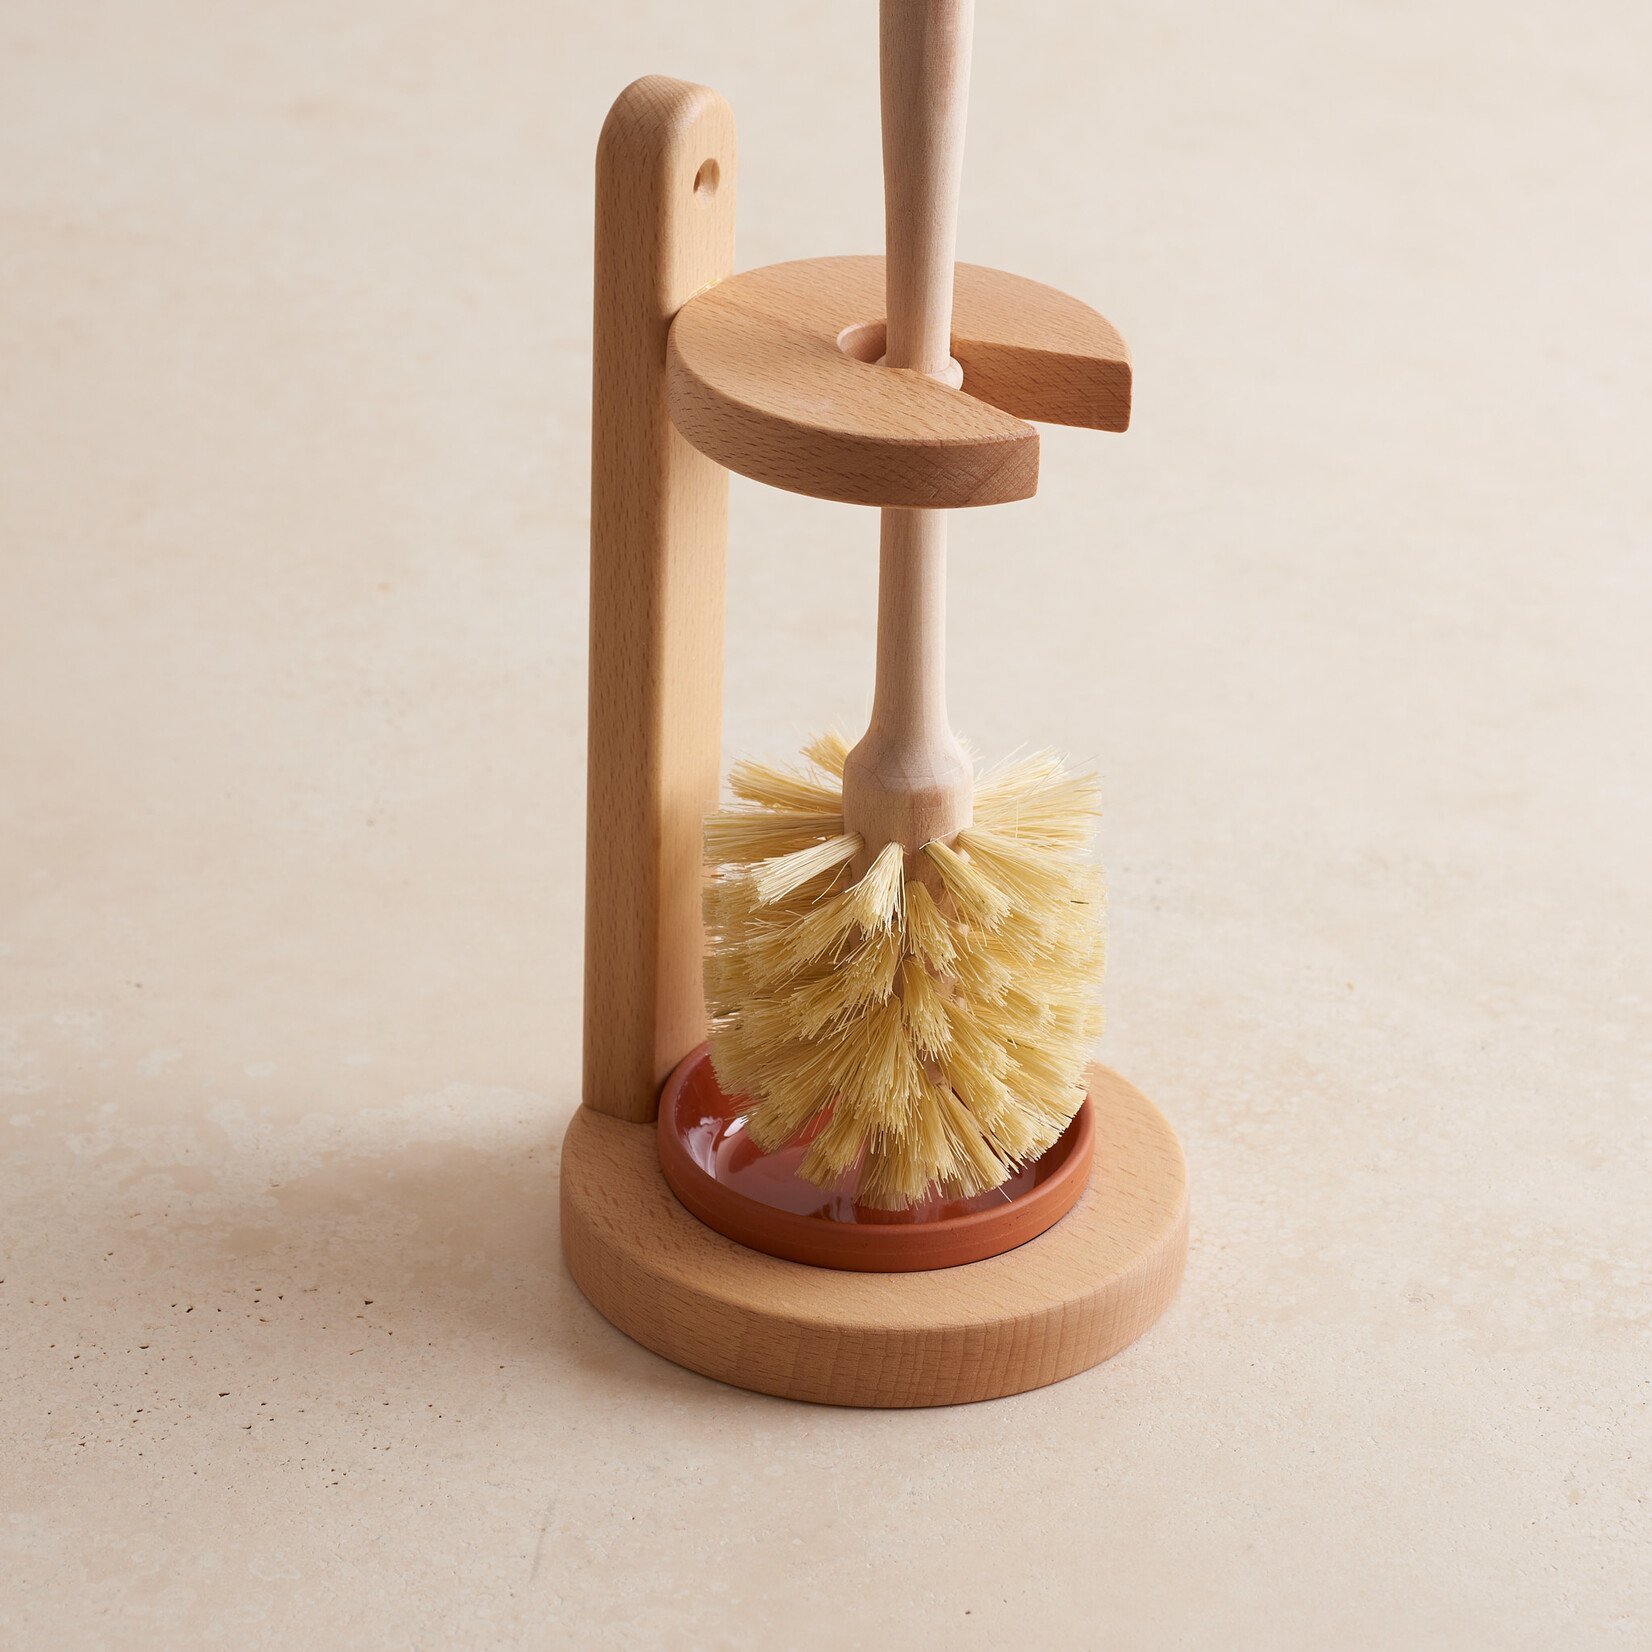 German Toilet Brush with Wooden Stand